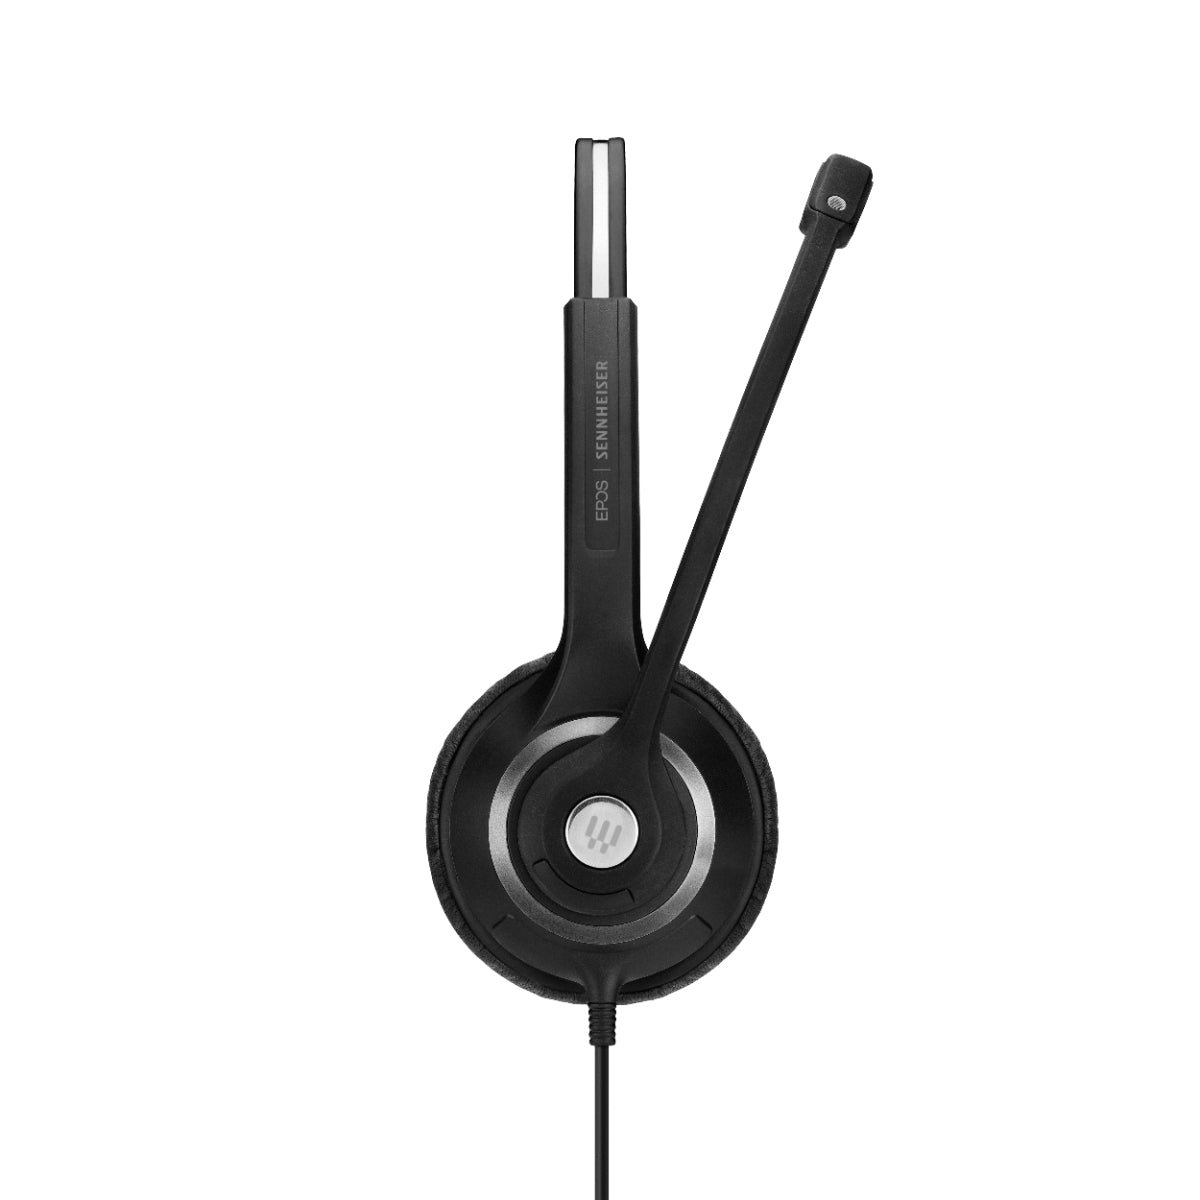 EPOS IMPACT SC 230 Monaral Headset, Black, 1m Cable, Easy Disconnect